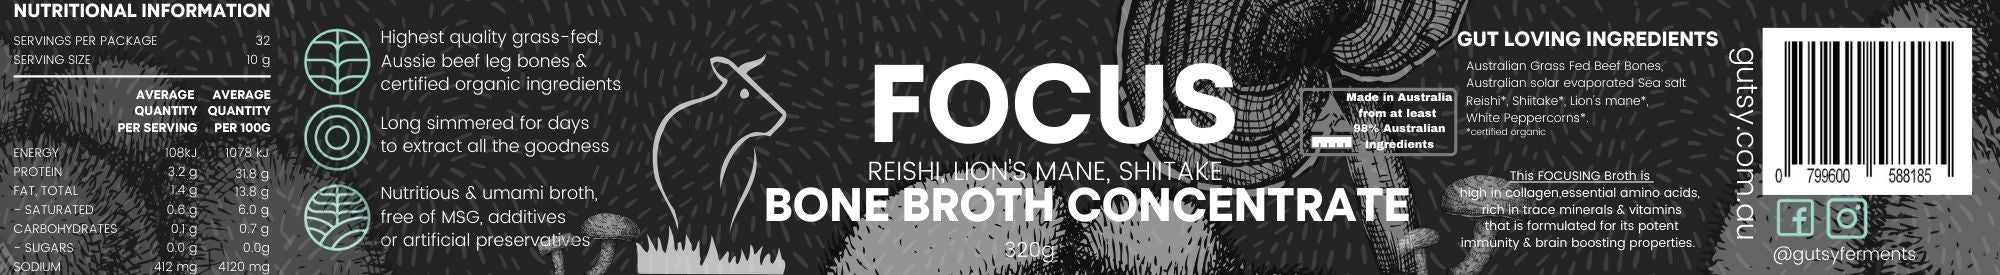 FOCUS - Concentrated Beef Bone Broth with medicinal mushrooms